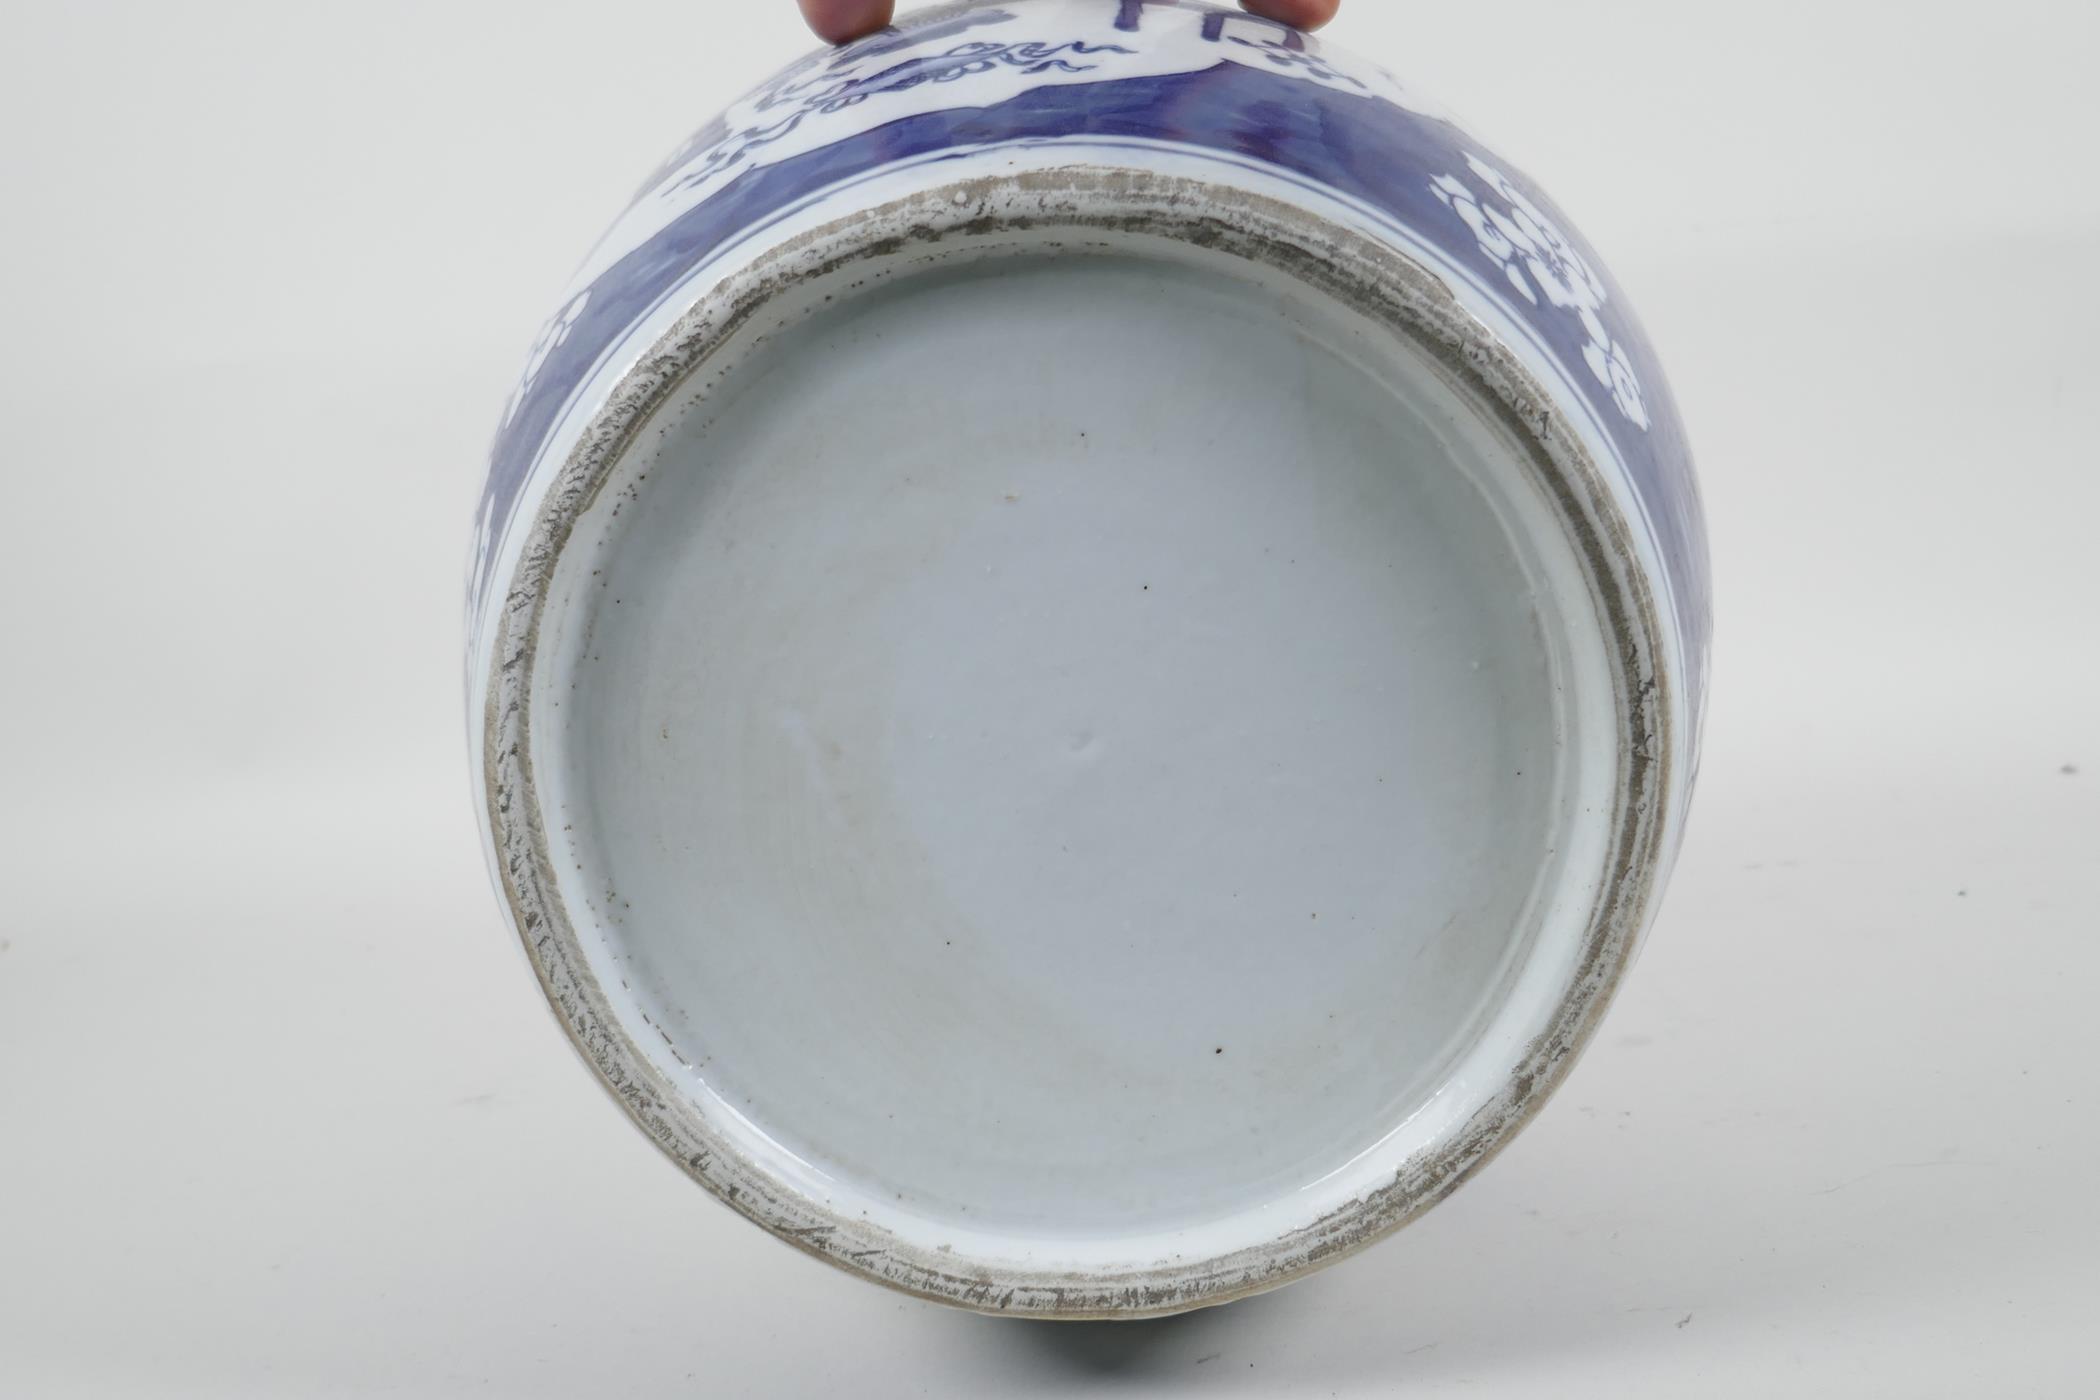 An early C20th Chinese blue and white porcelain jar with decorative panels depicting objects of - Image 3 of 3